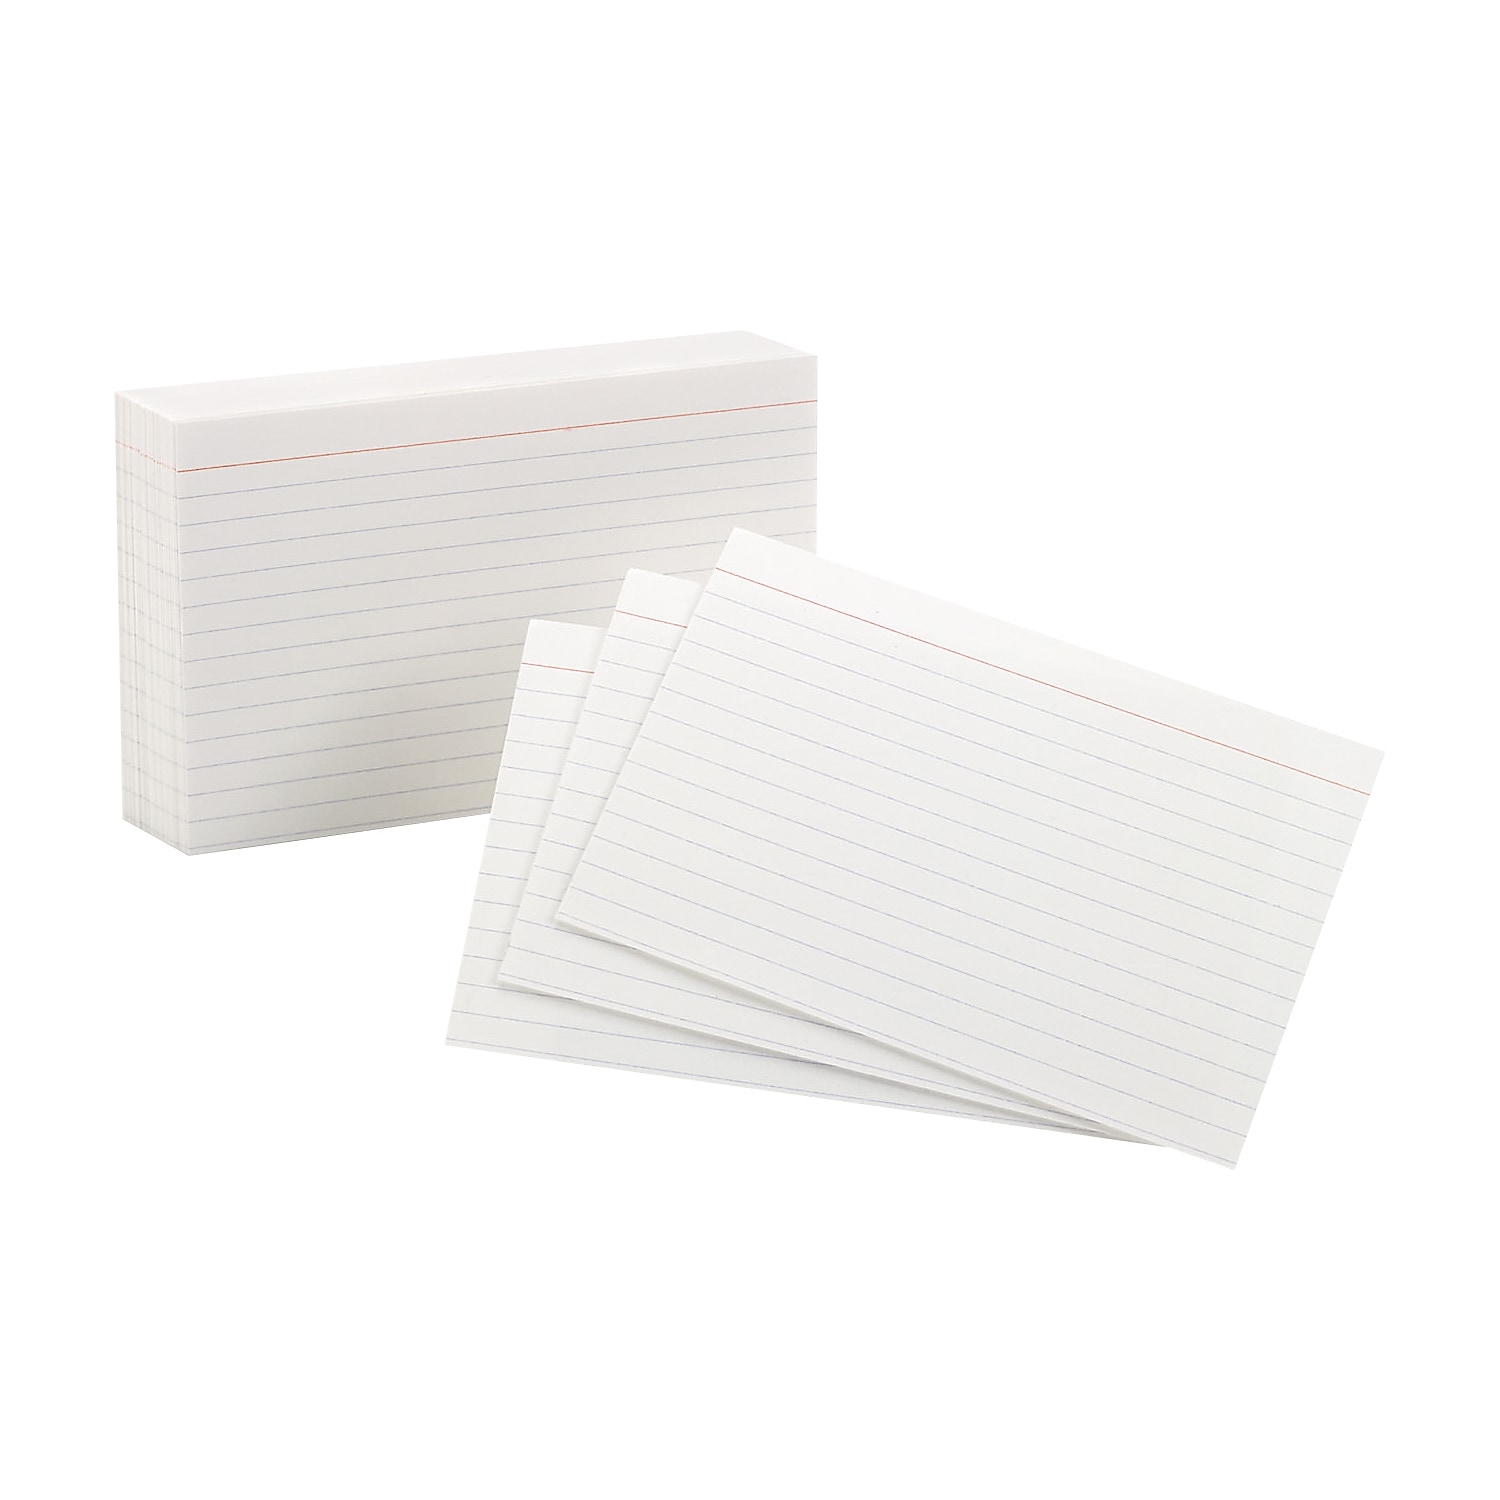 Oxford Ruled Index Cards, 3 x 5, White, 100/Pack (31) - image 2 of 4